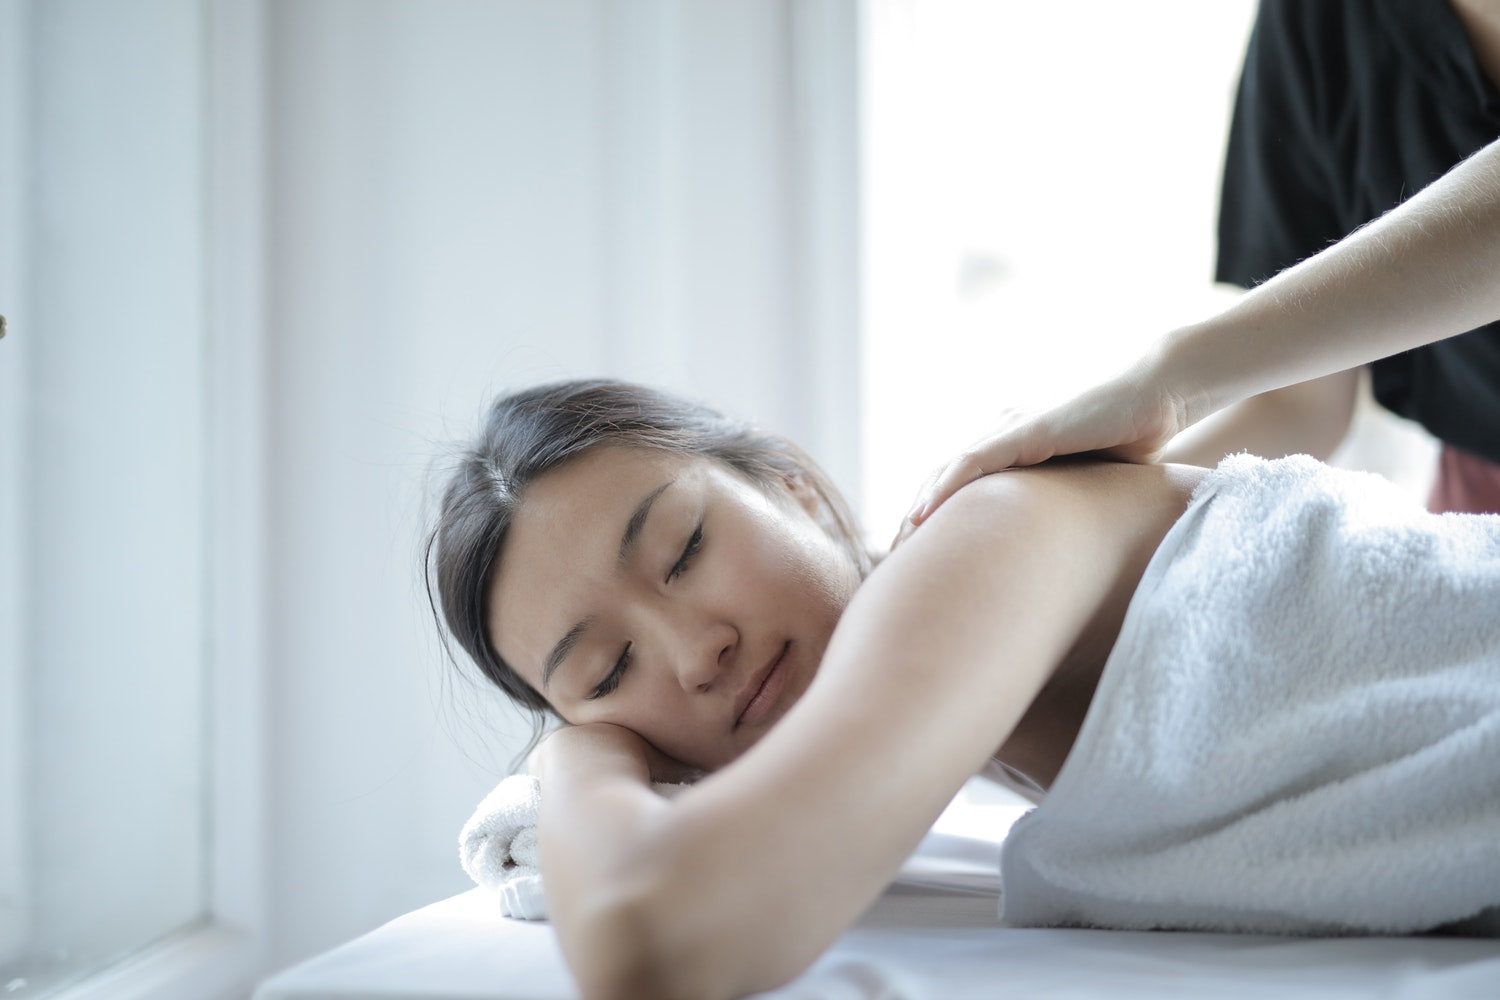 What Is a CBD Massage? Here’s What To Expect